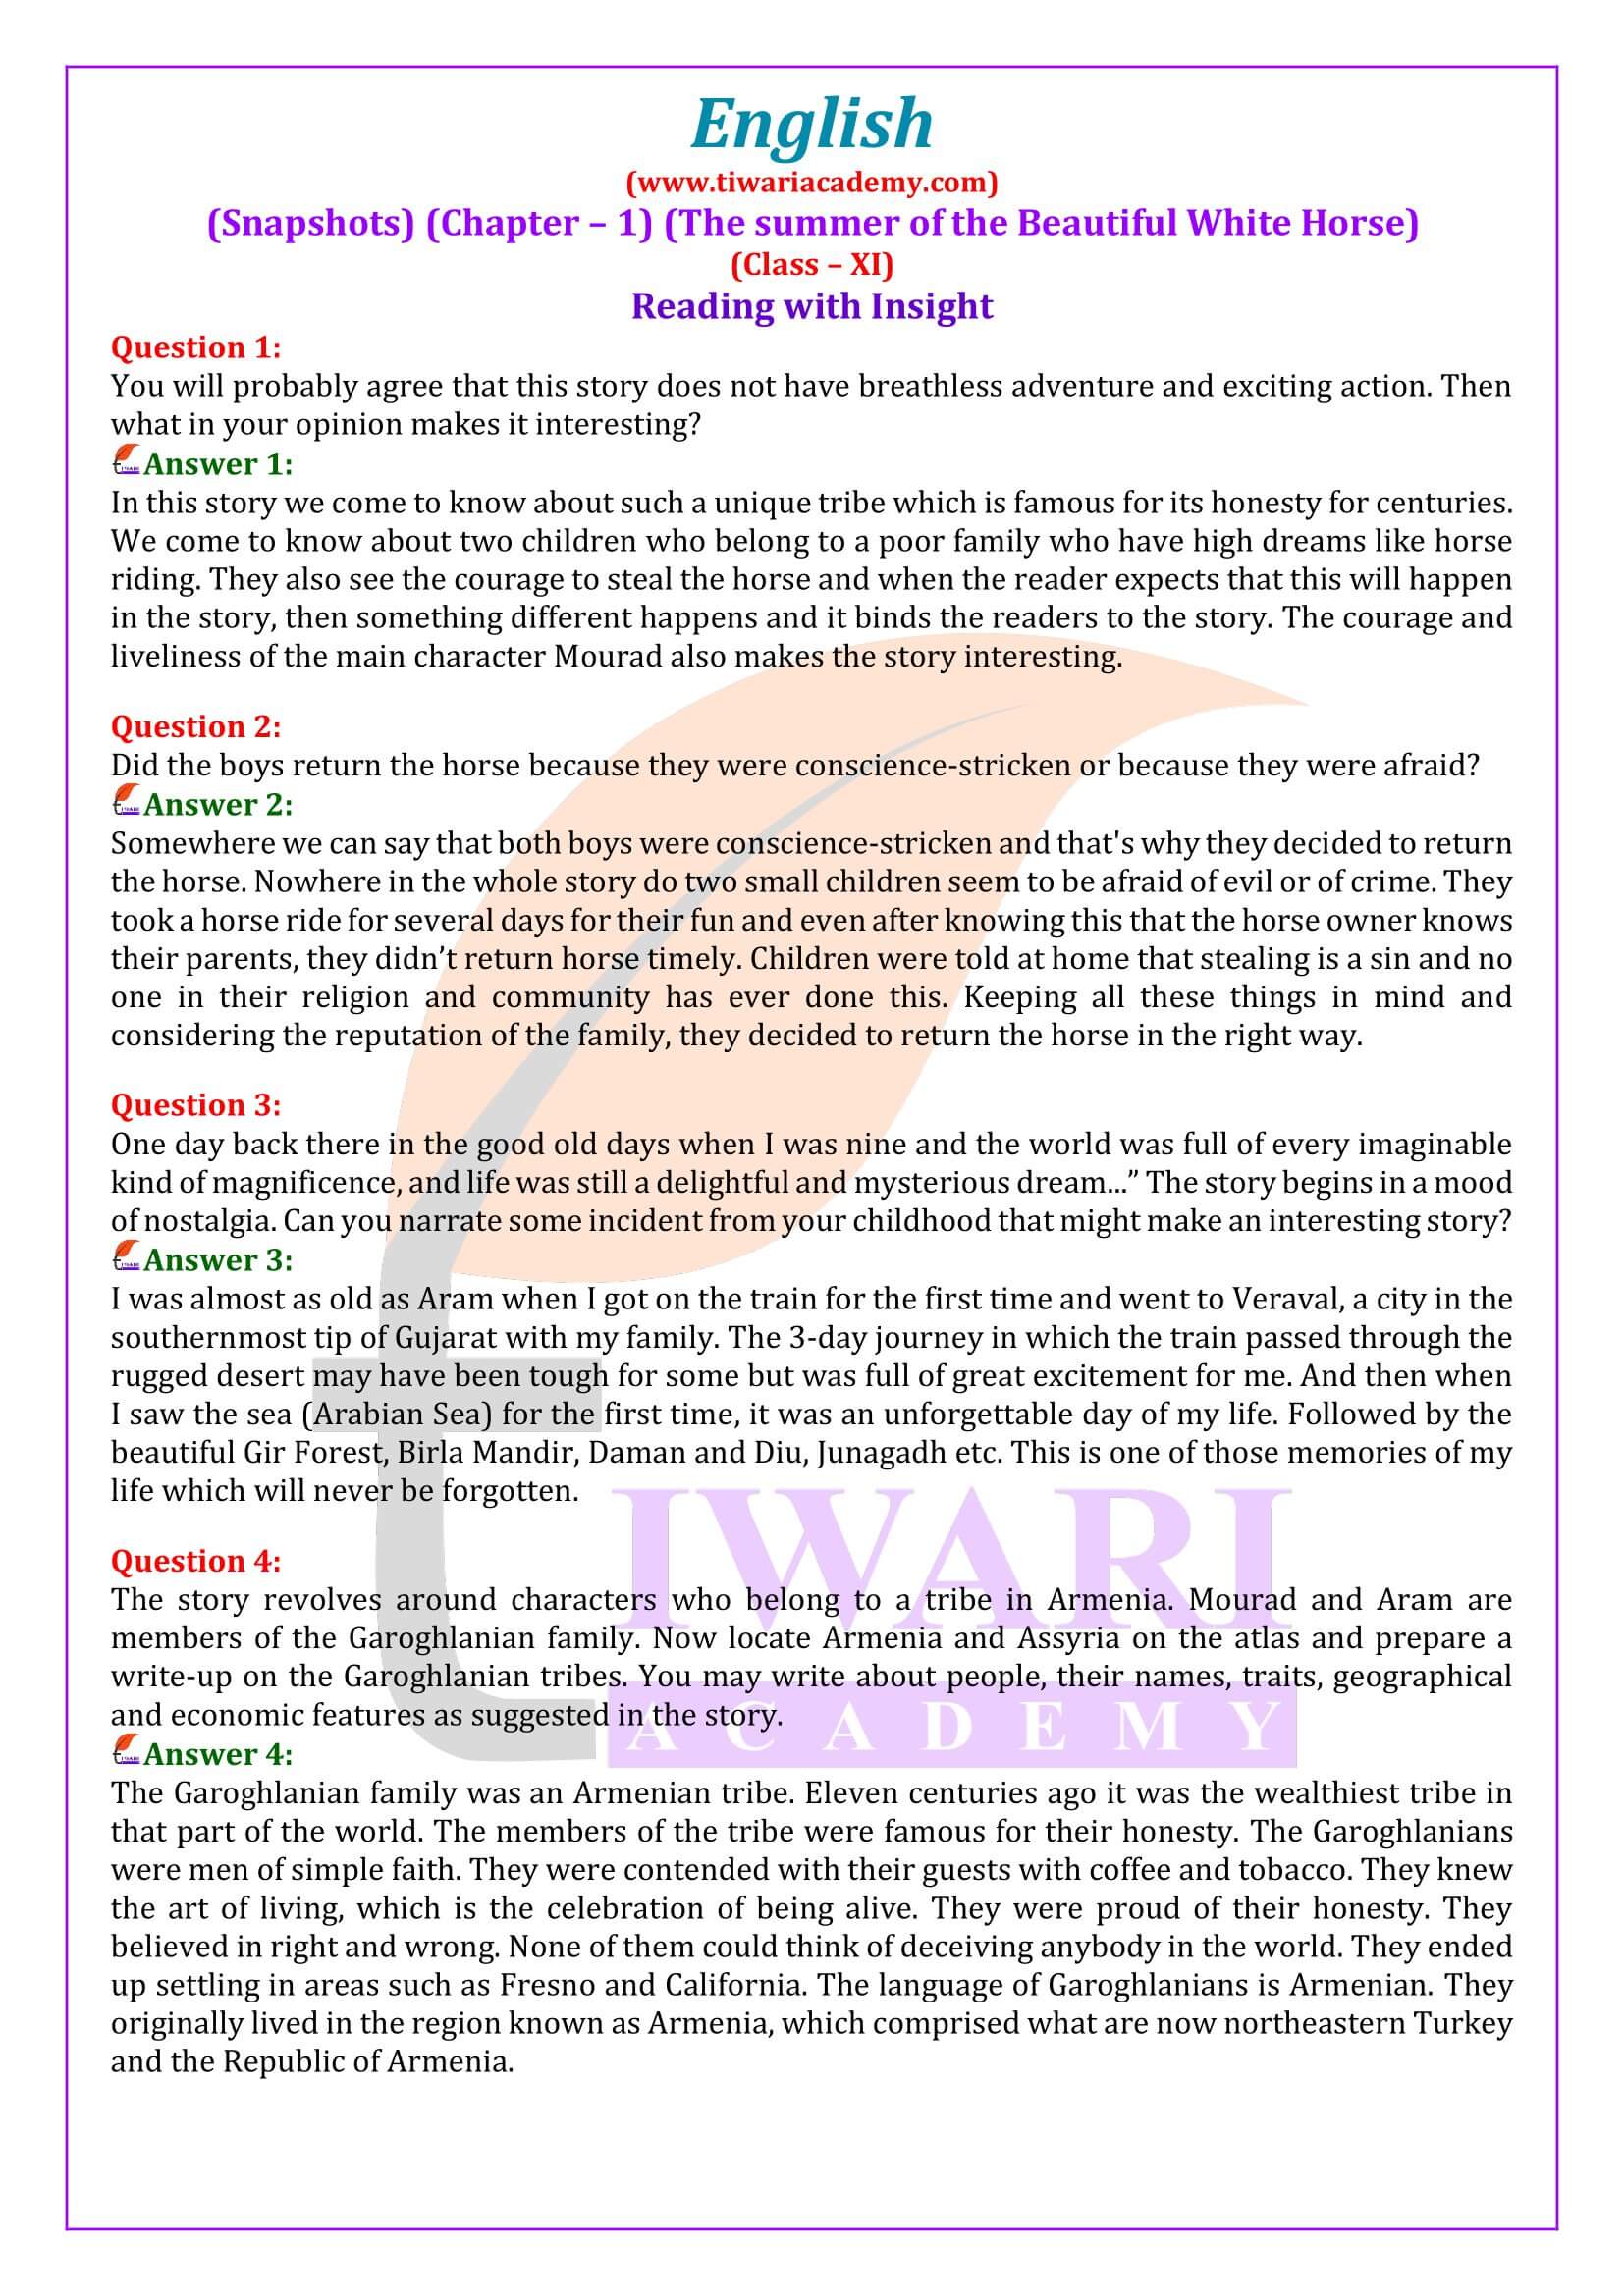 NCERT Solutions for Class 11 English Snapshots Chapter 1